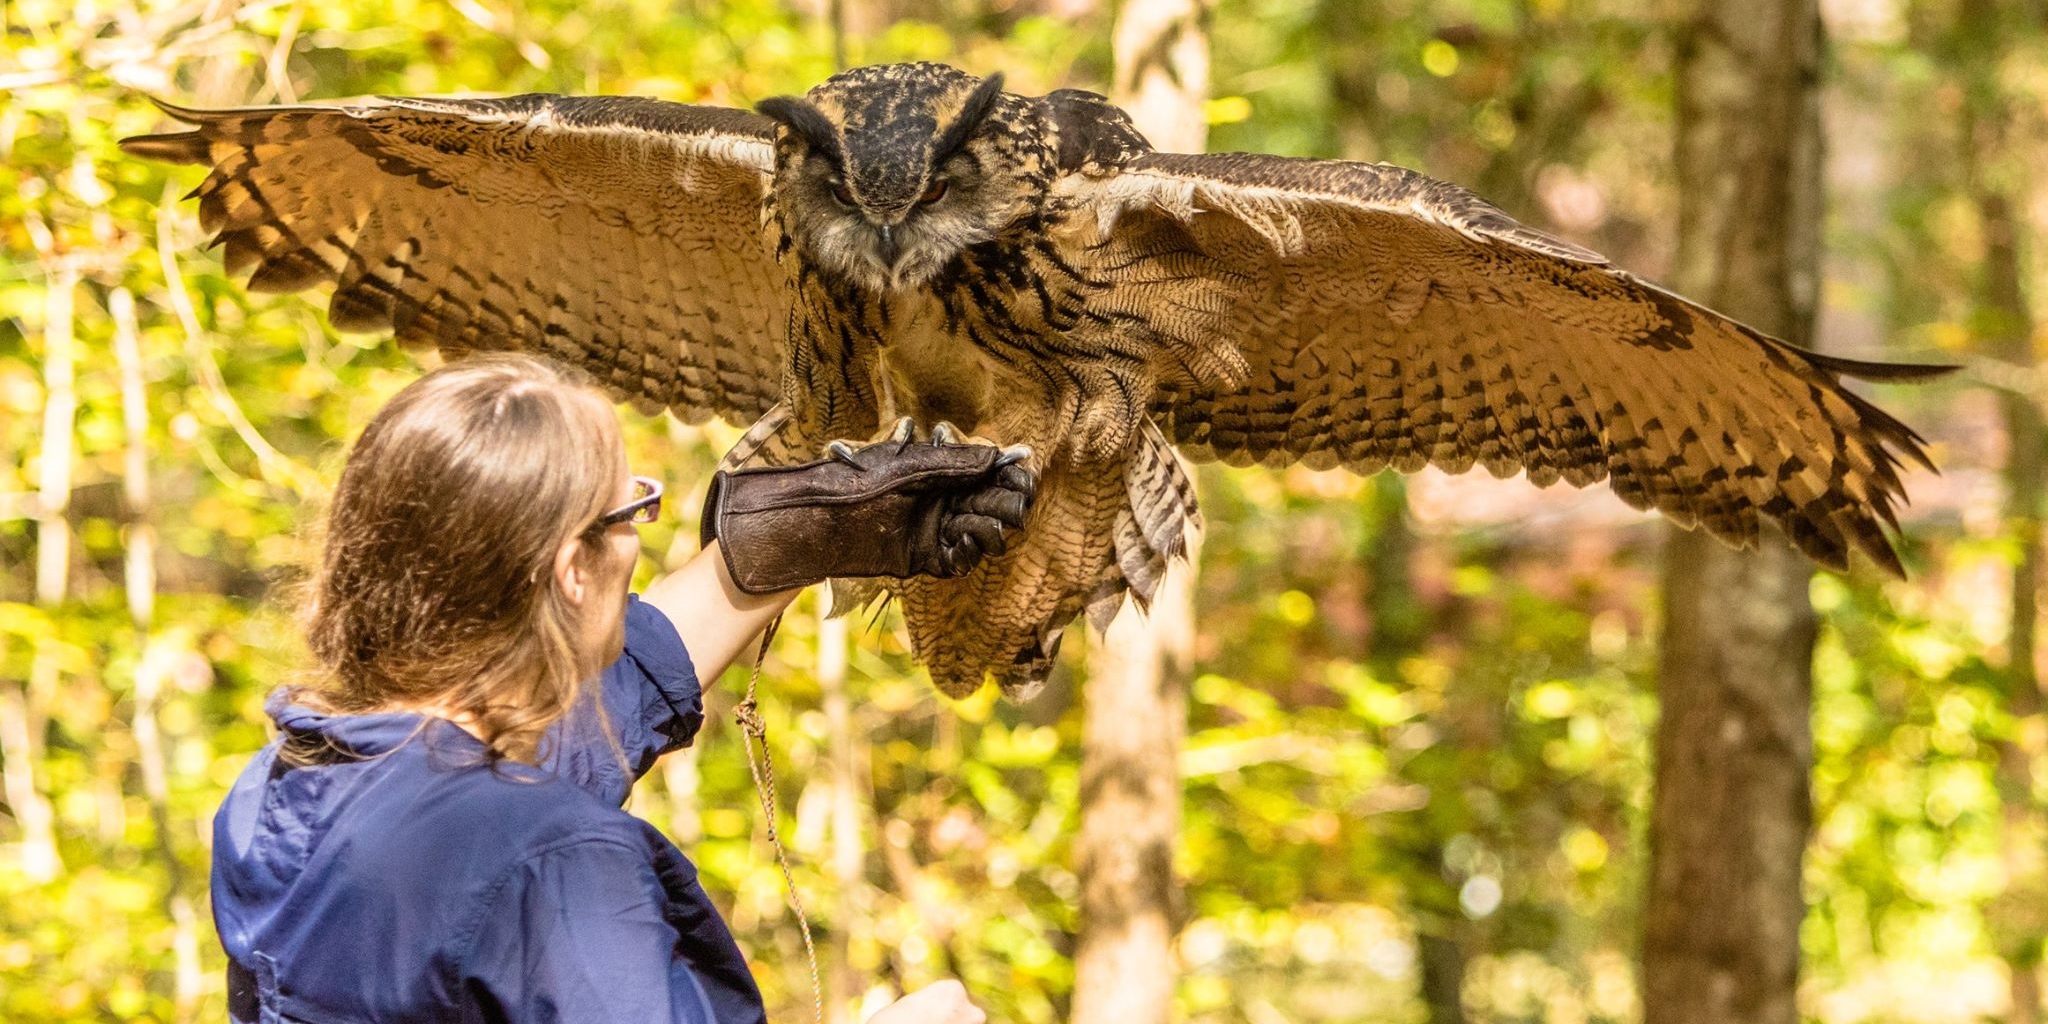 Girl outdoors with a large hawk perched on her hand.